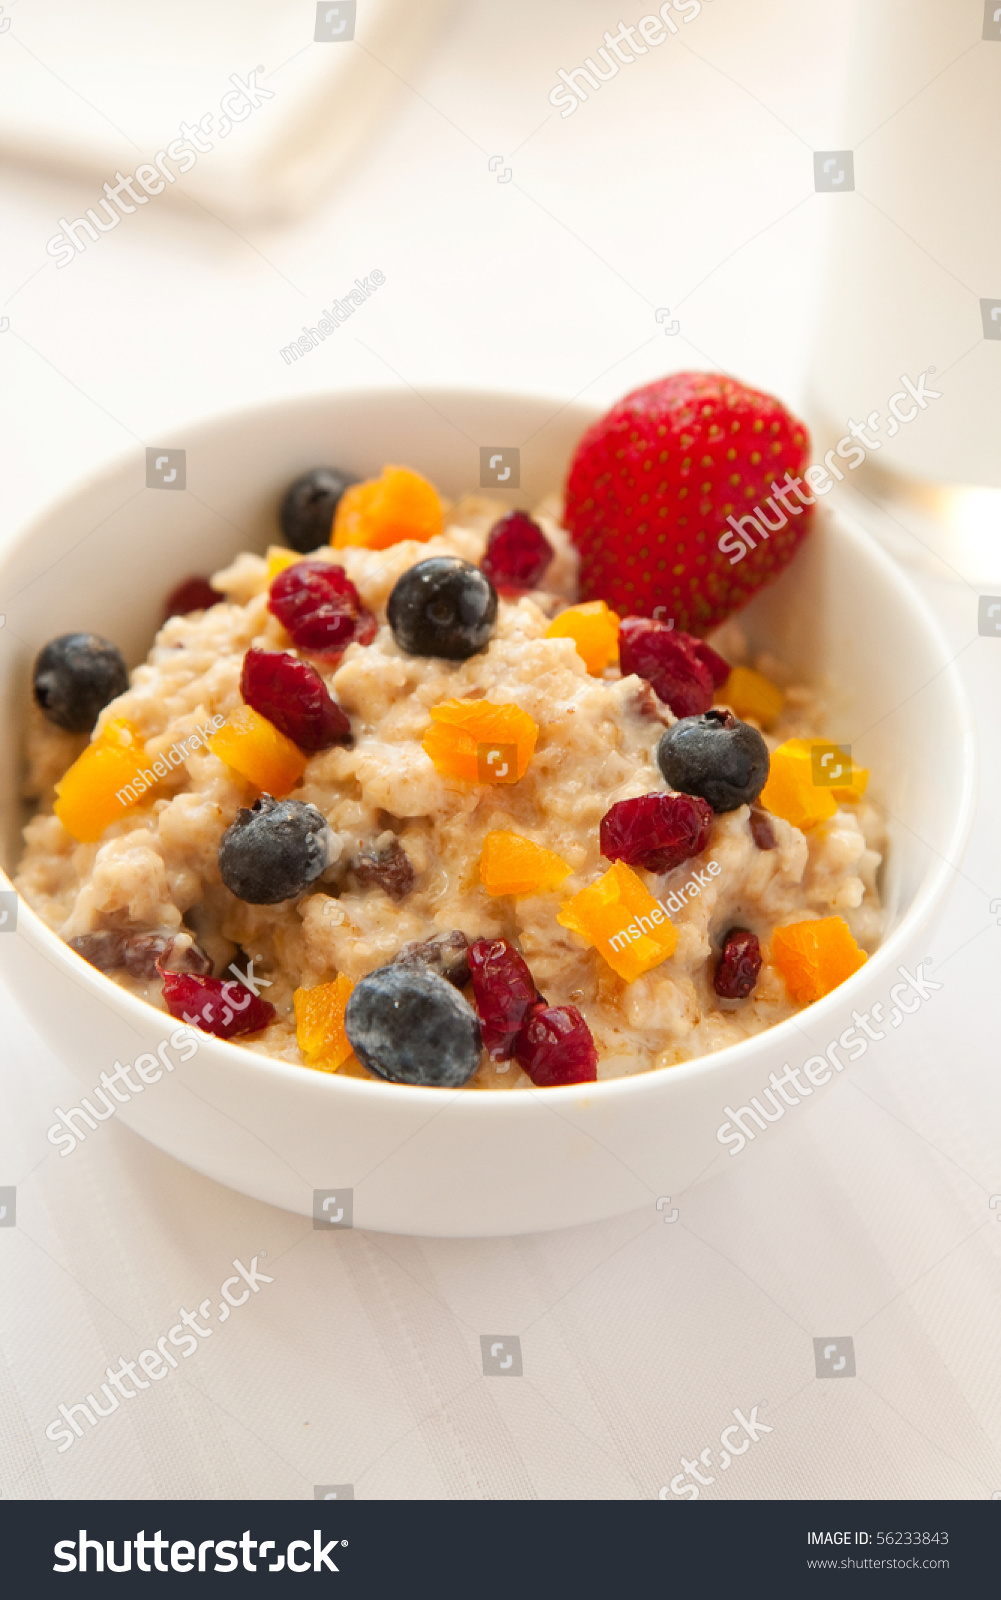 A Fiber Rich Rich Breakfast Complete With Fresh And Dried Fruits Stock ...